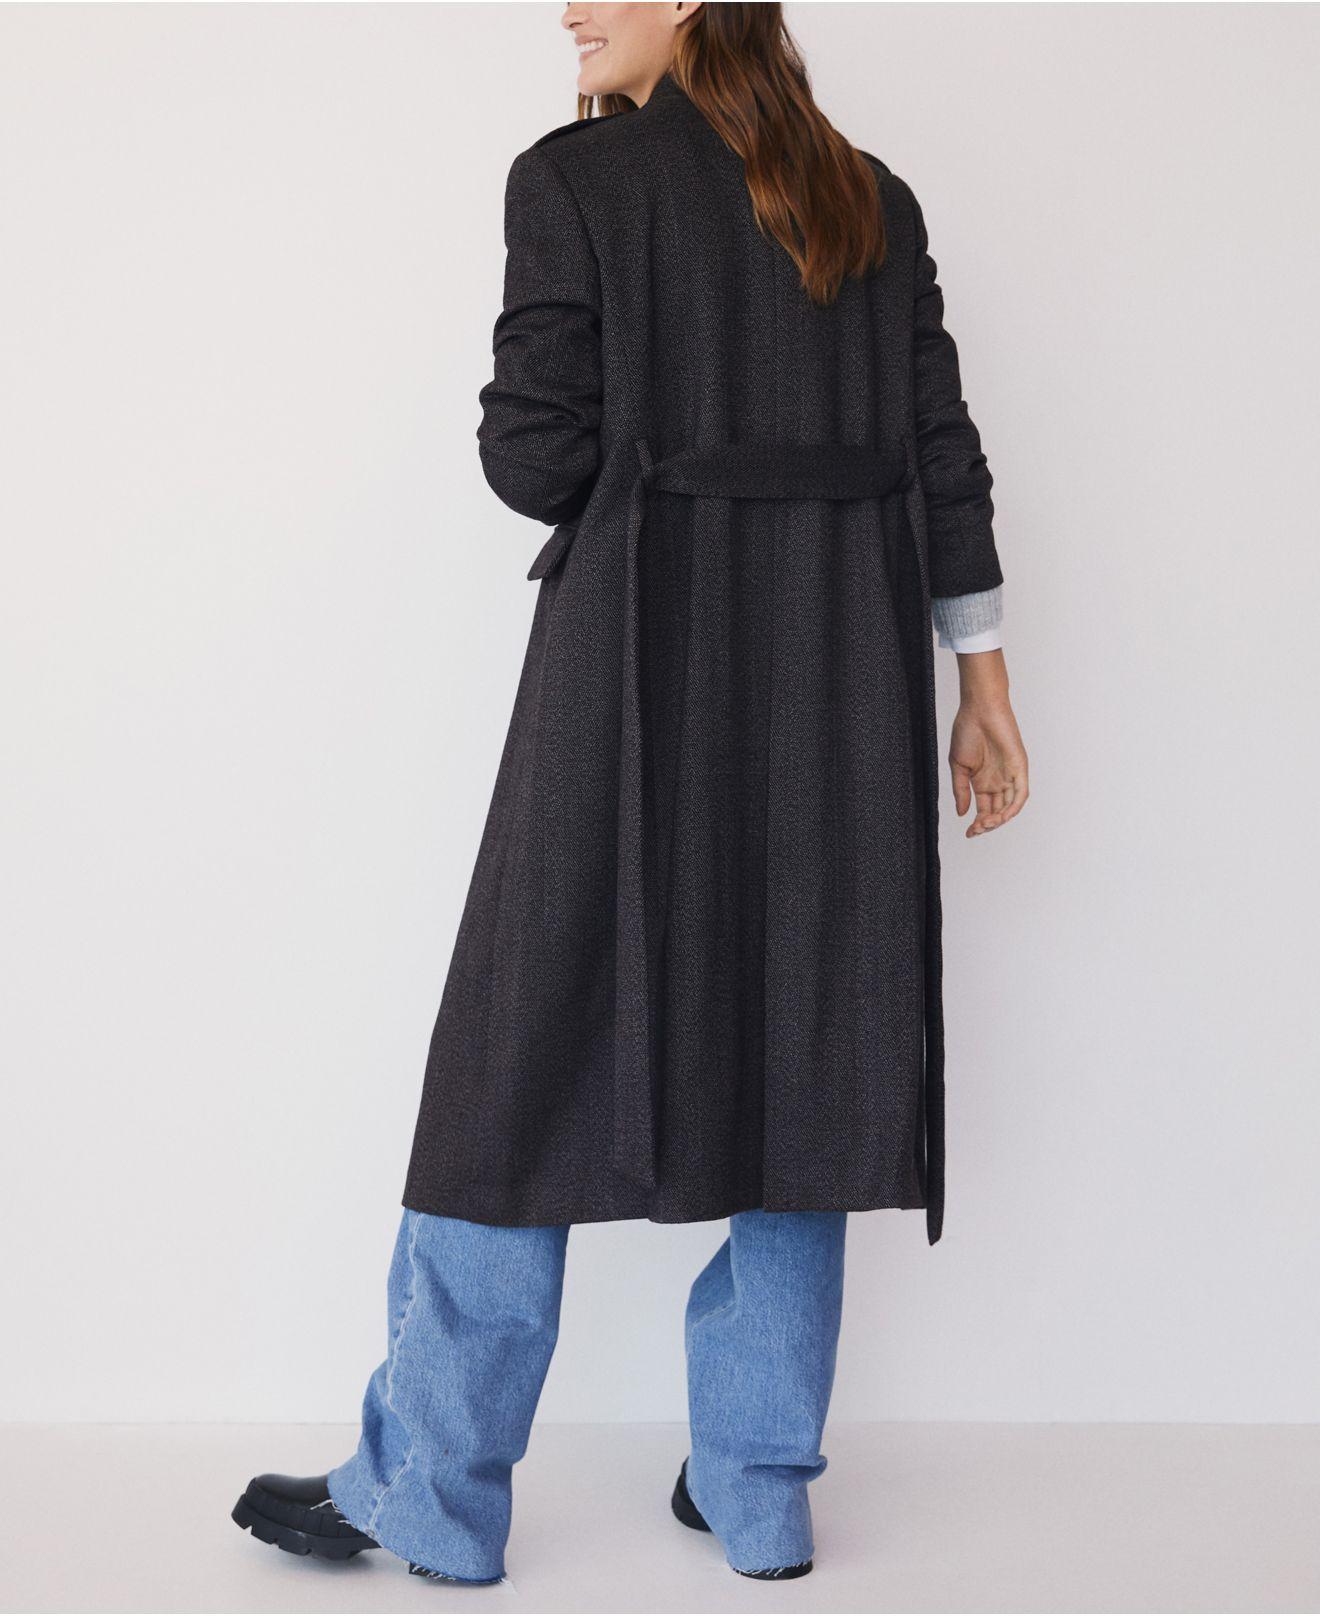 Mango Double-breasted Wool Coat in Gray - Lyst